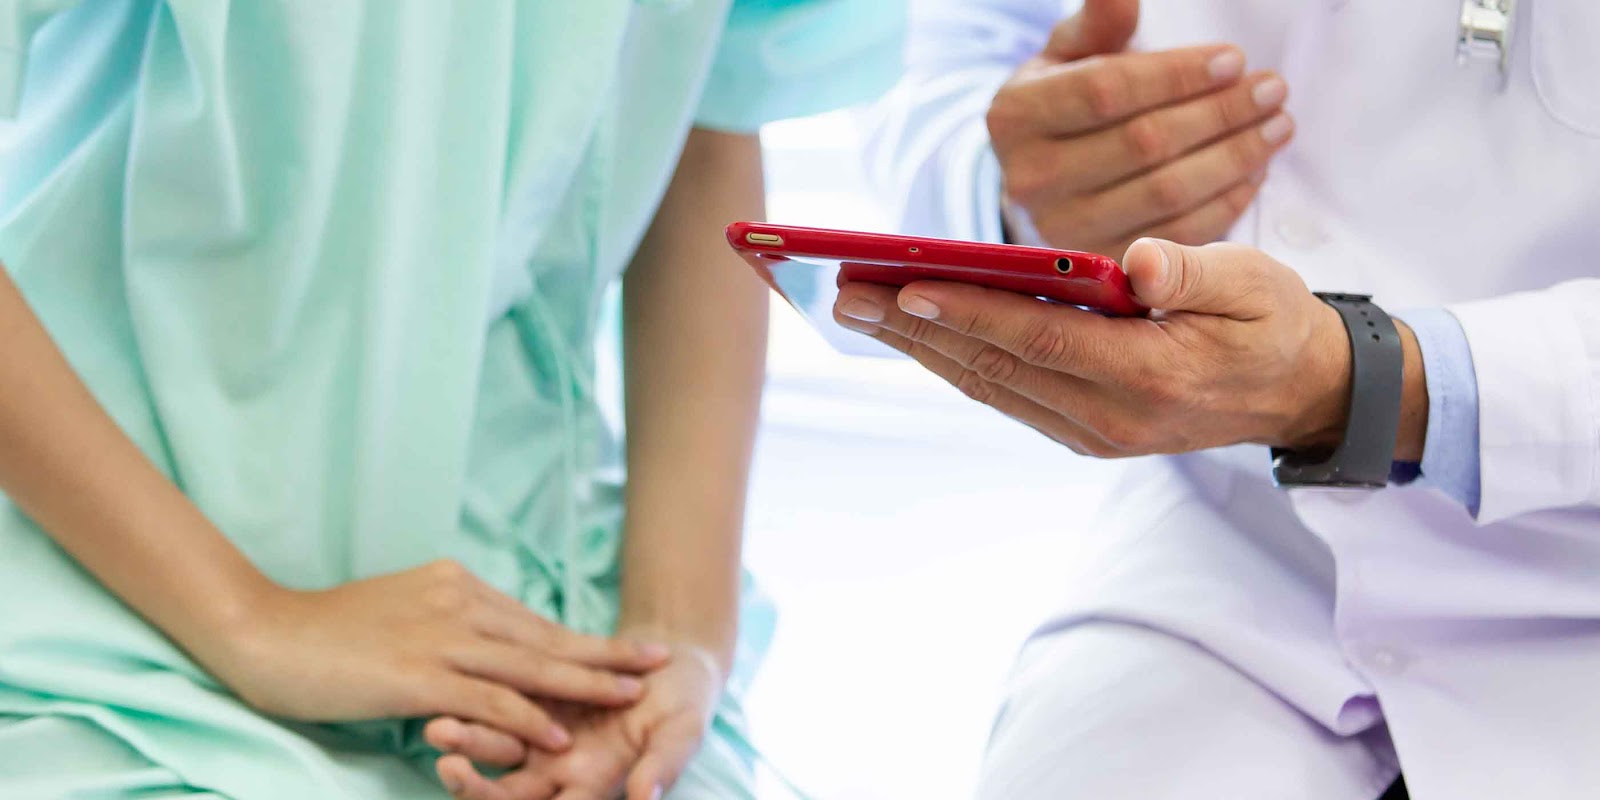 patient and physician looking at mobile device together